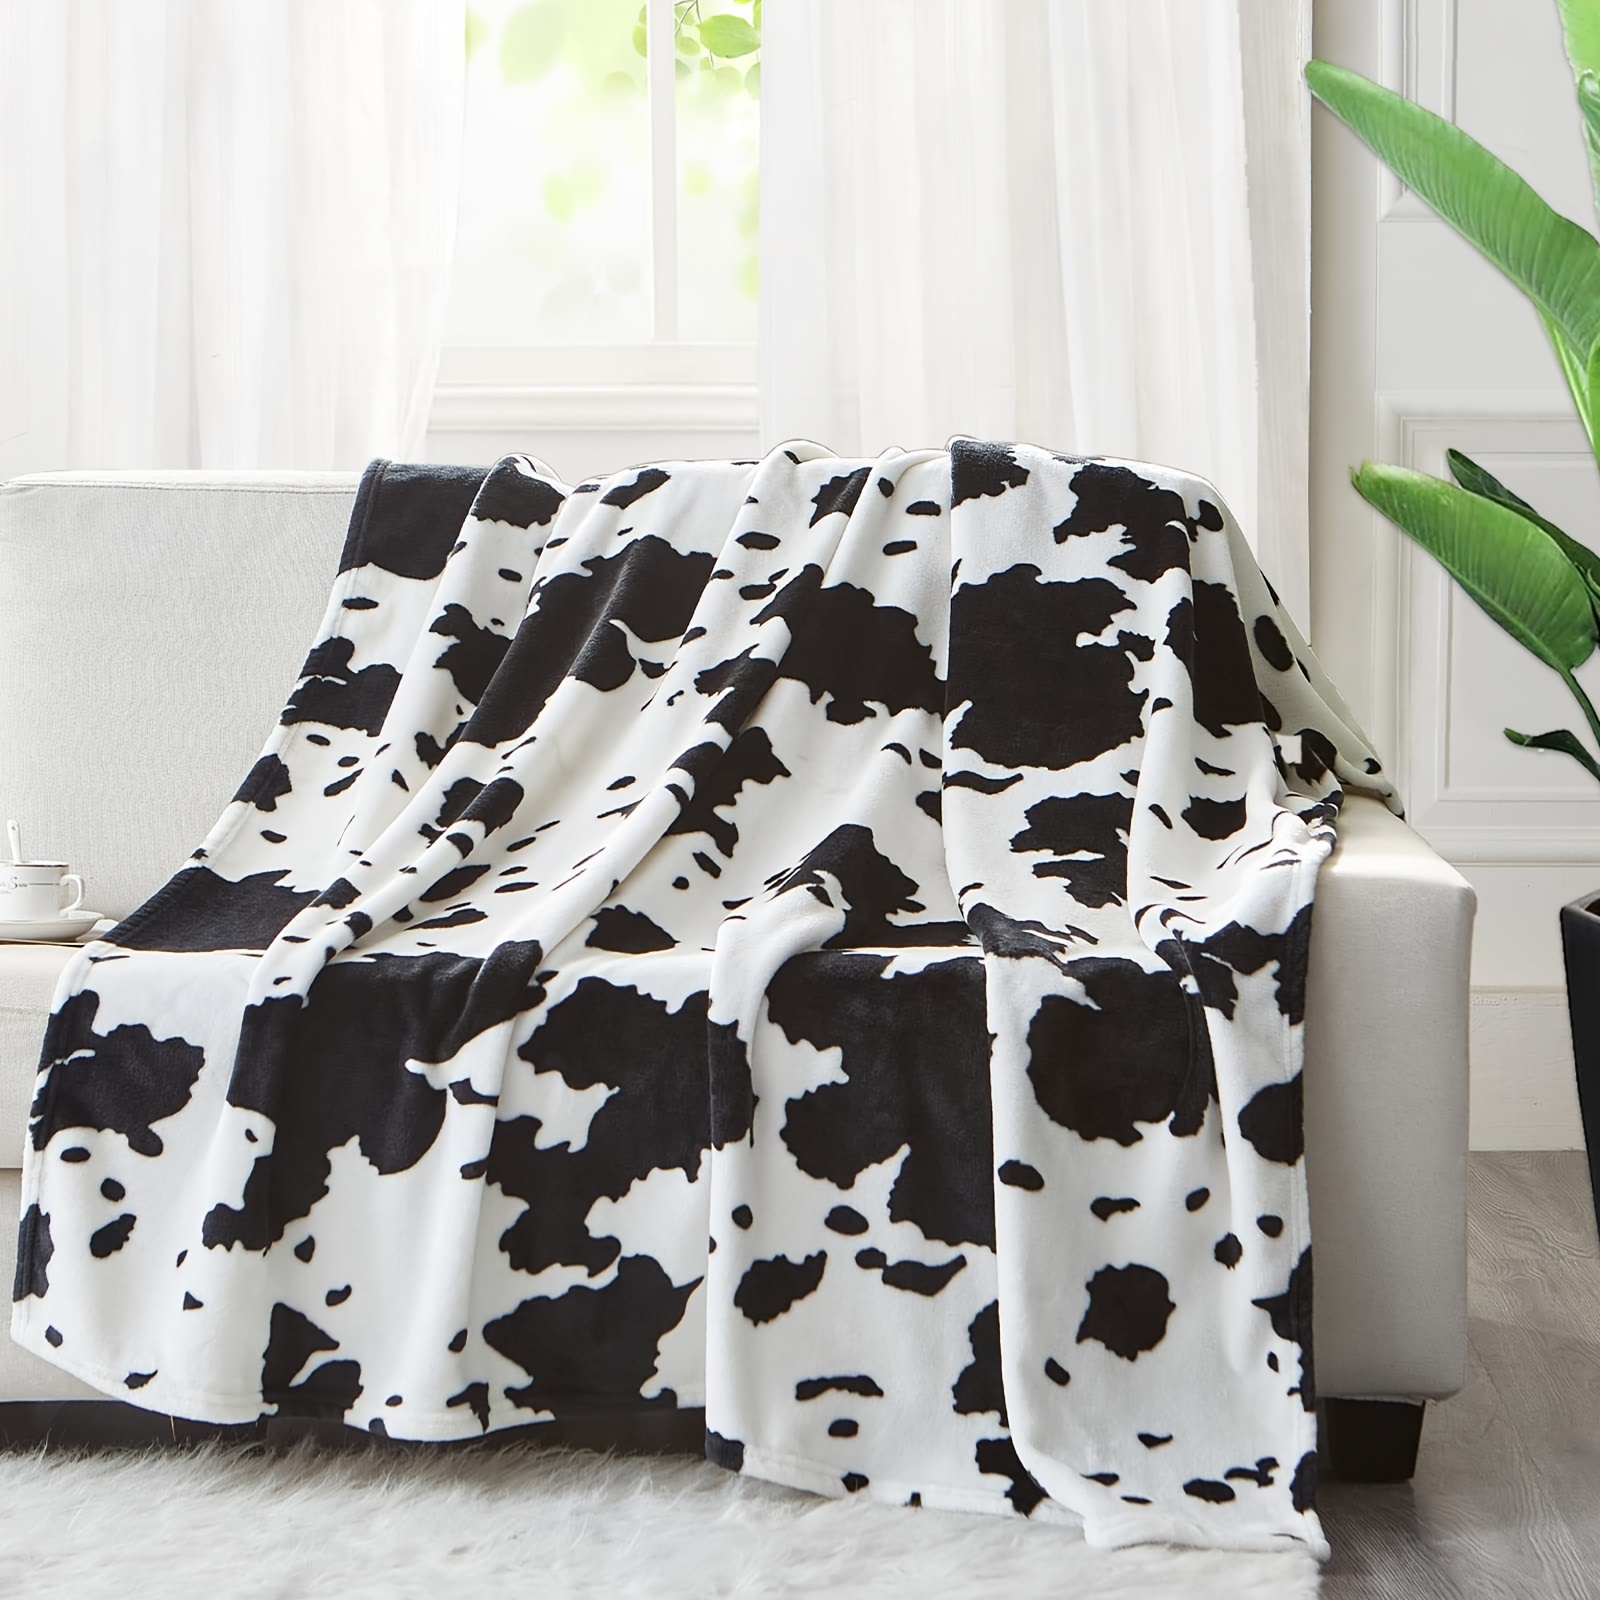 

1pc Fleece Cow Print Blanket Black And White Bed Cow Throws Soft Couch Sofa Cozy Warm Small Blankets Plush Gift For Daughter Mom, Bedroom Decor